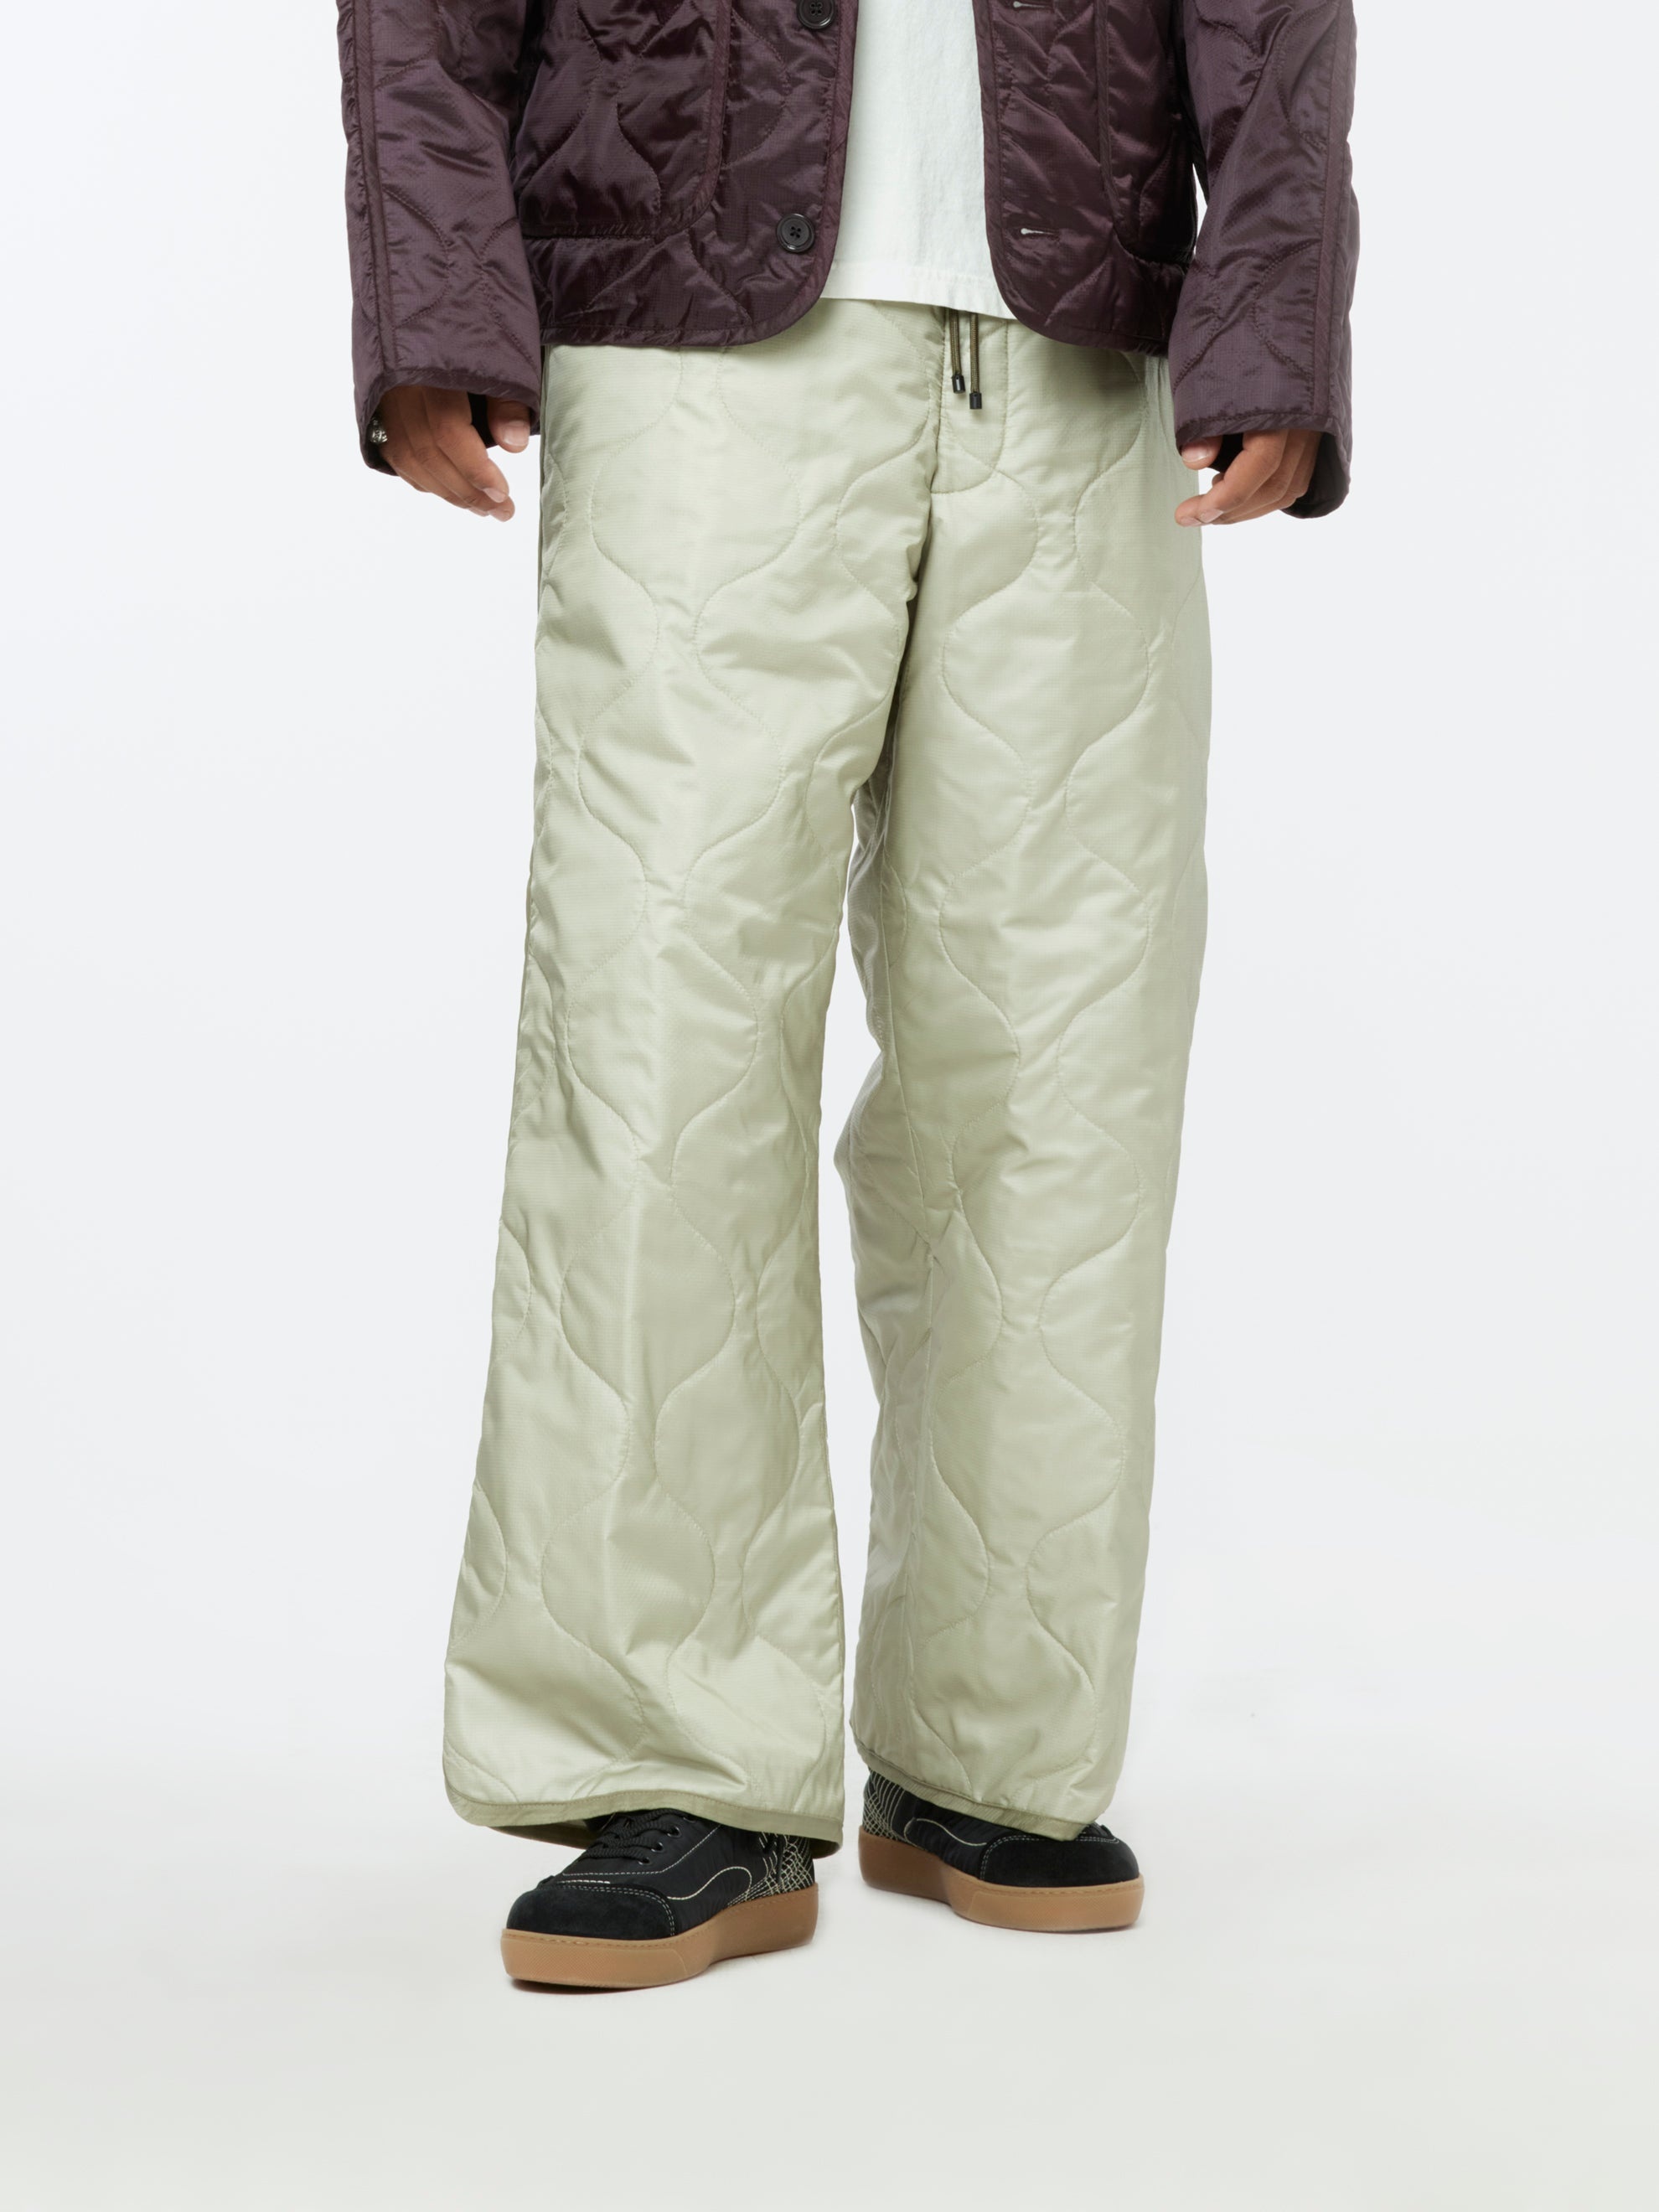 PANSBOURG RIPSPORT PANTS (SAND) - 1